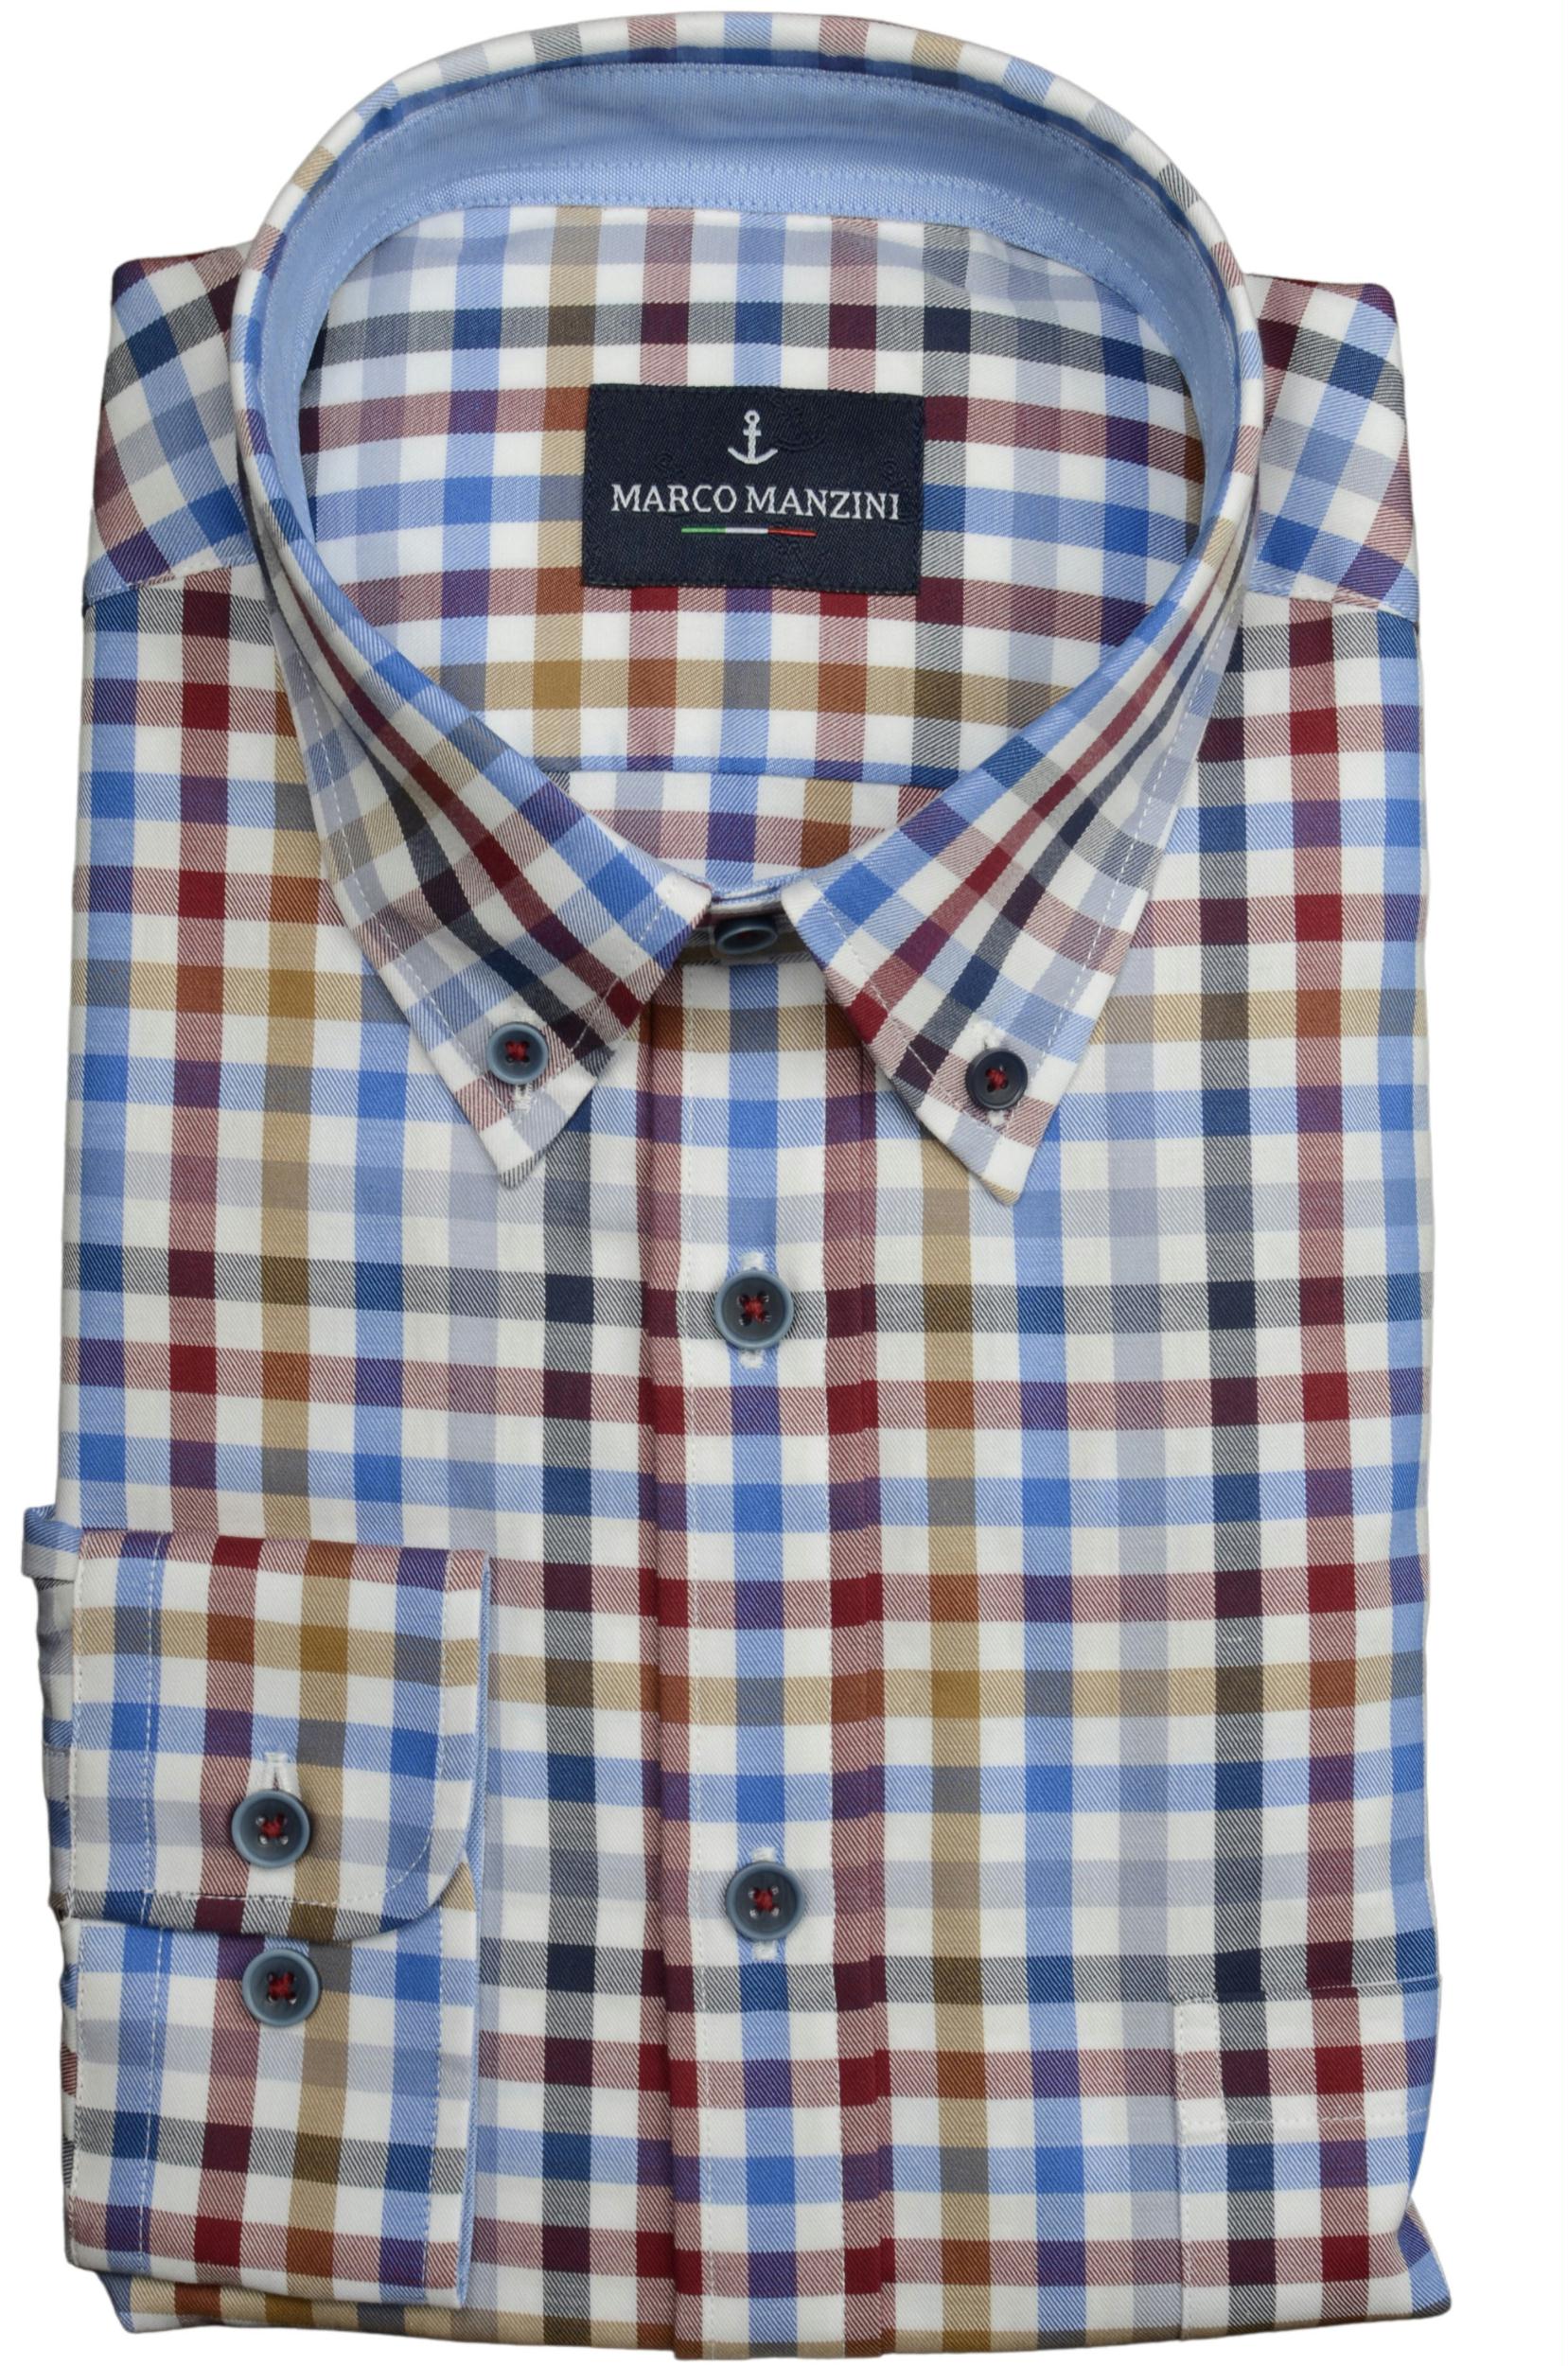 Bos Bright Blue Casual hemd lange mouw Rood Willem Shirt Casual Bd 20307WI31/500 multicolour